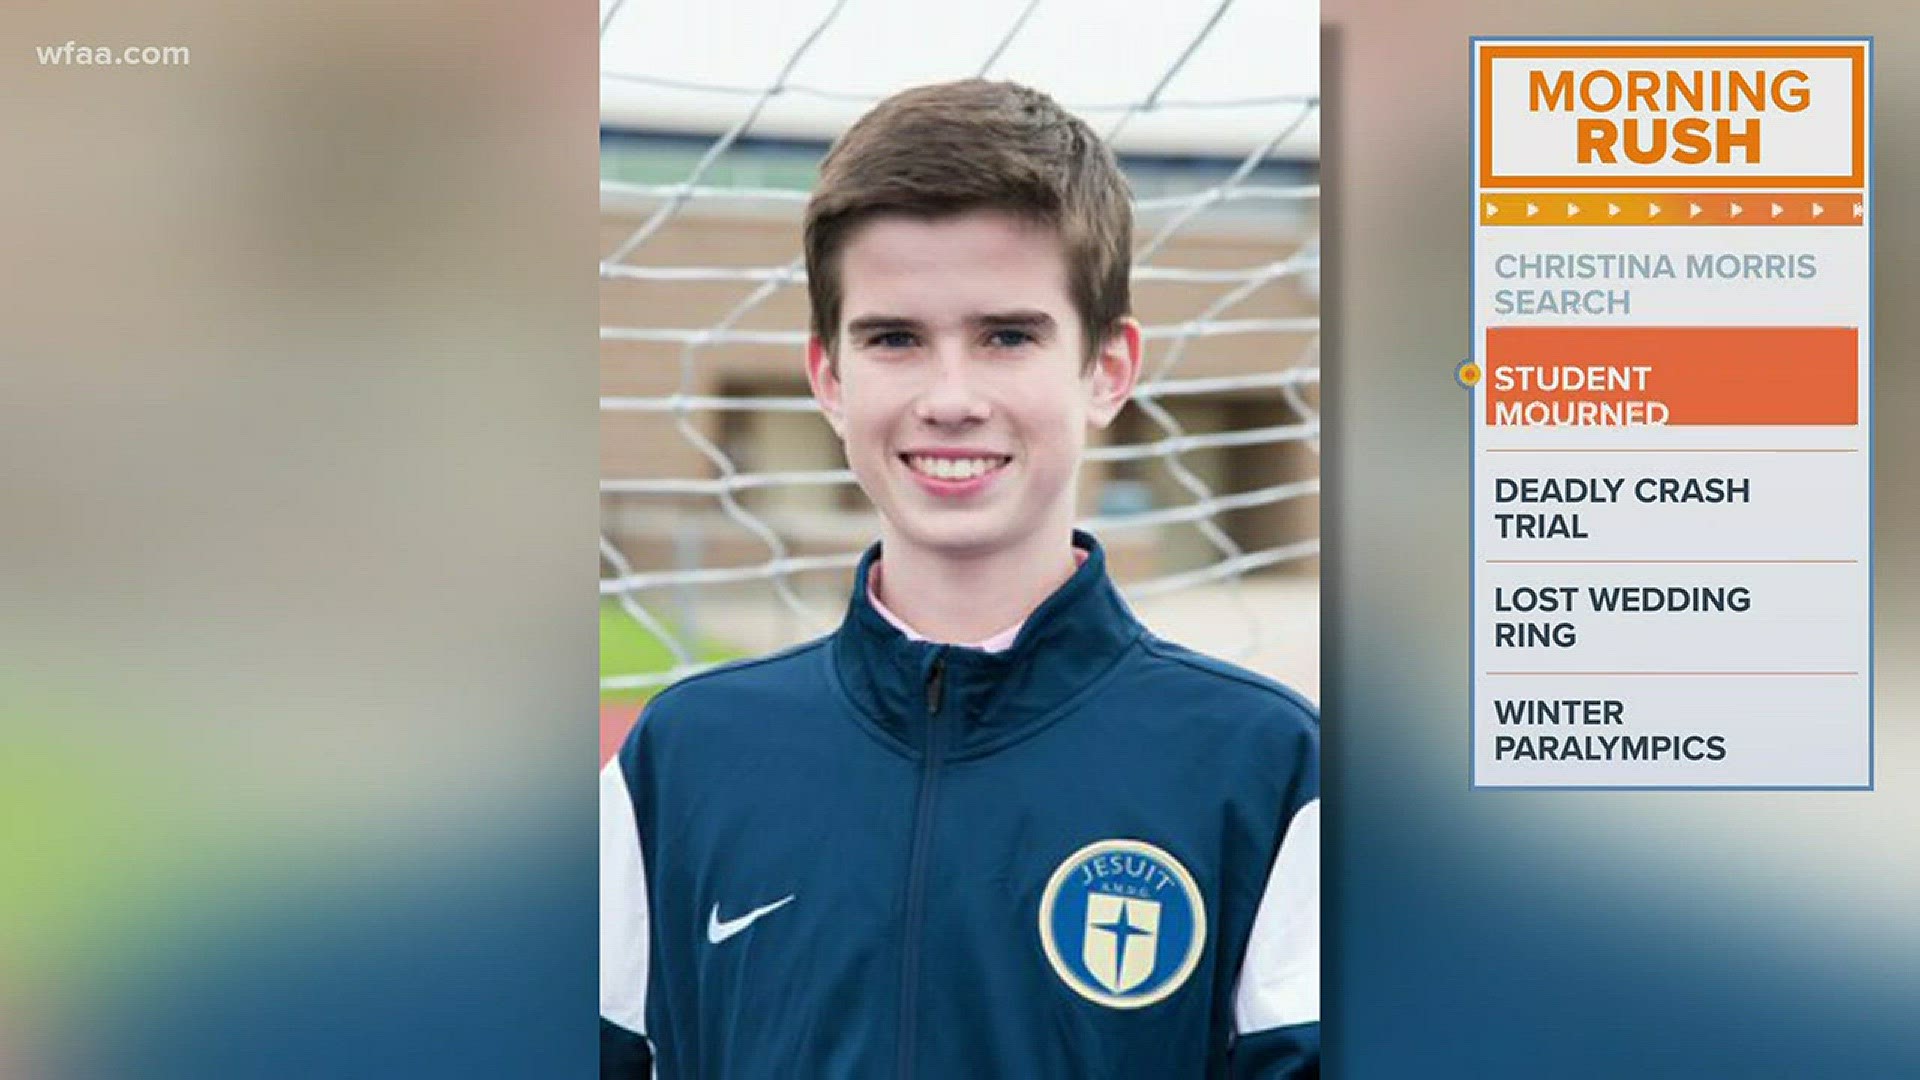 Jesuit in mourning for student who died in car crash